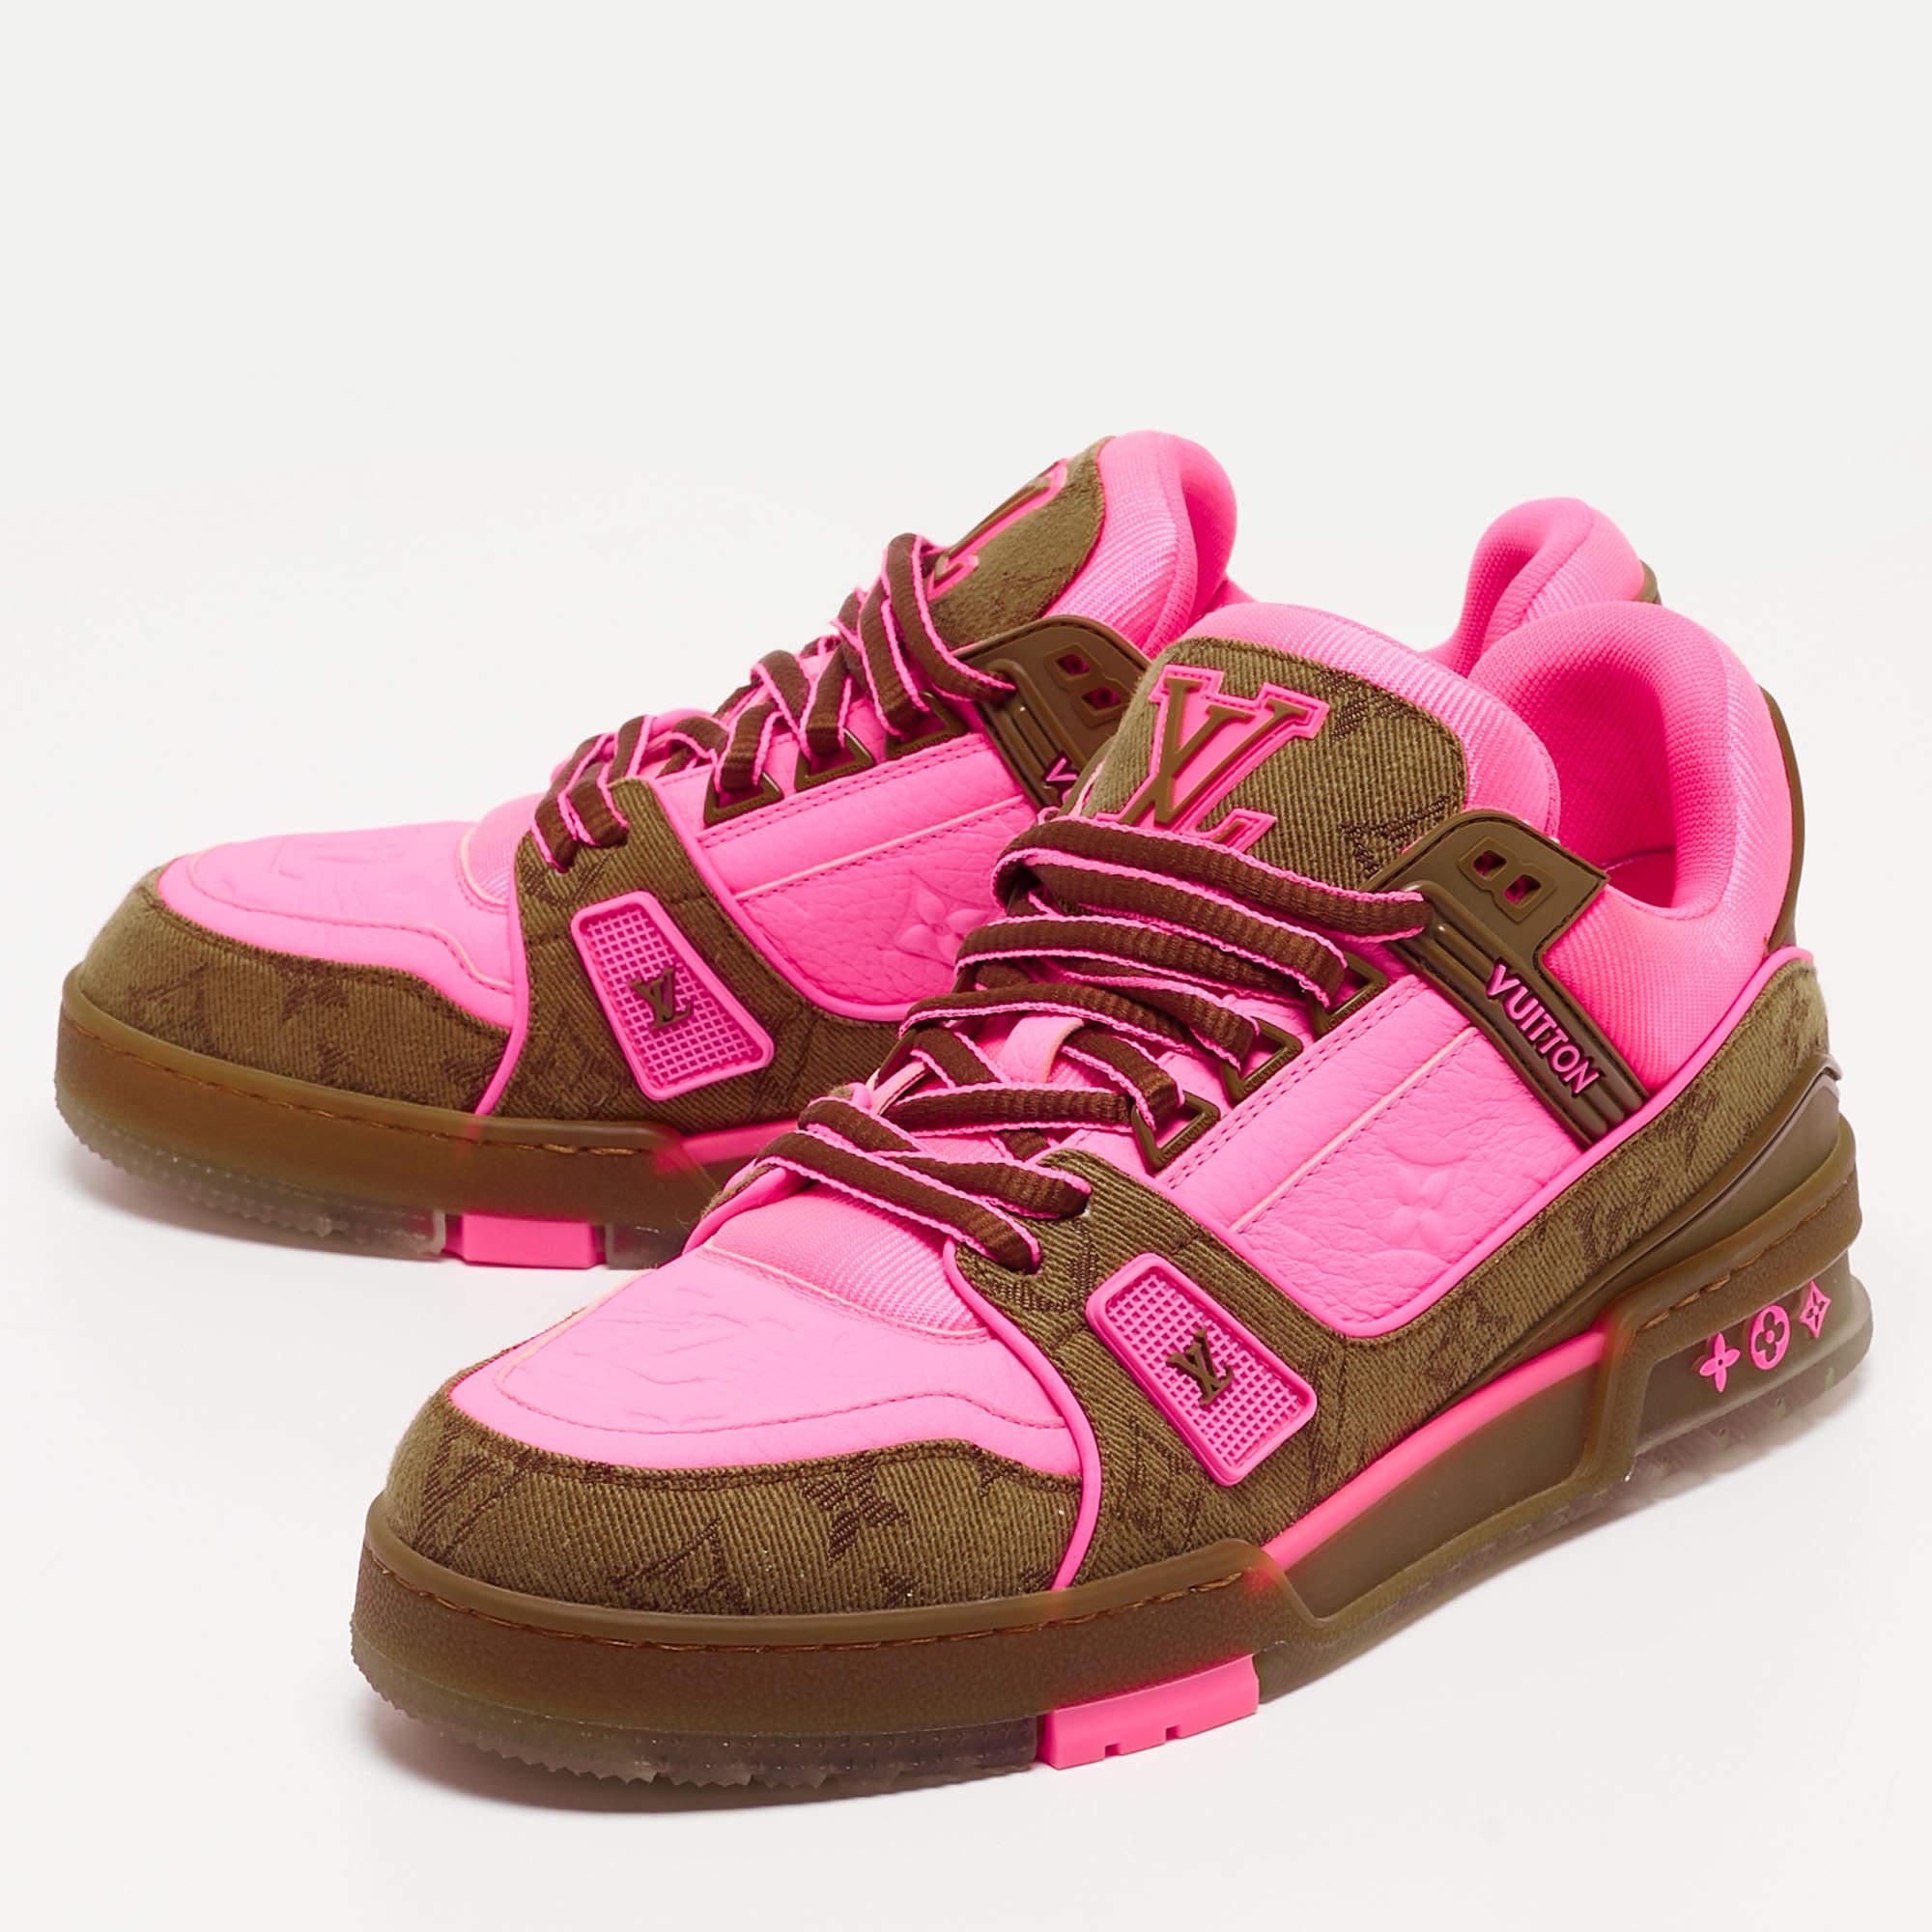 Louis Vuitton Neon Pink/Brown Monogram Leather and Canvas LV Trainer Sneakers Si 5